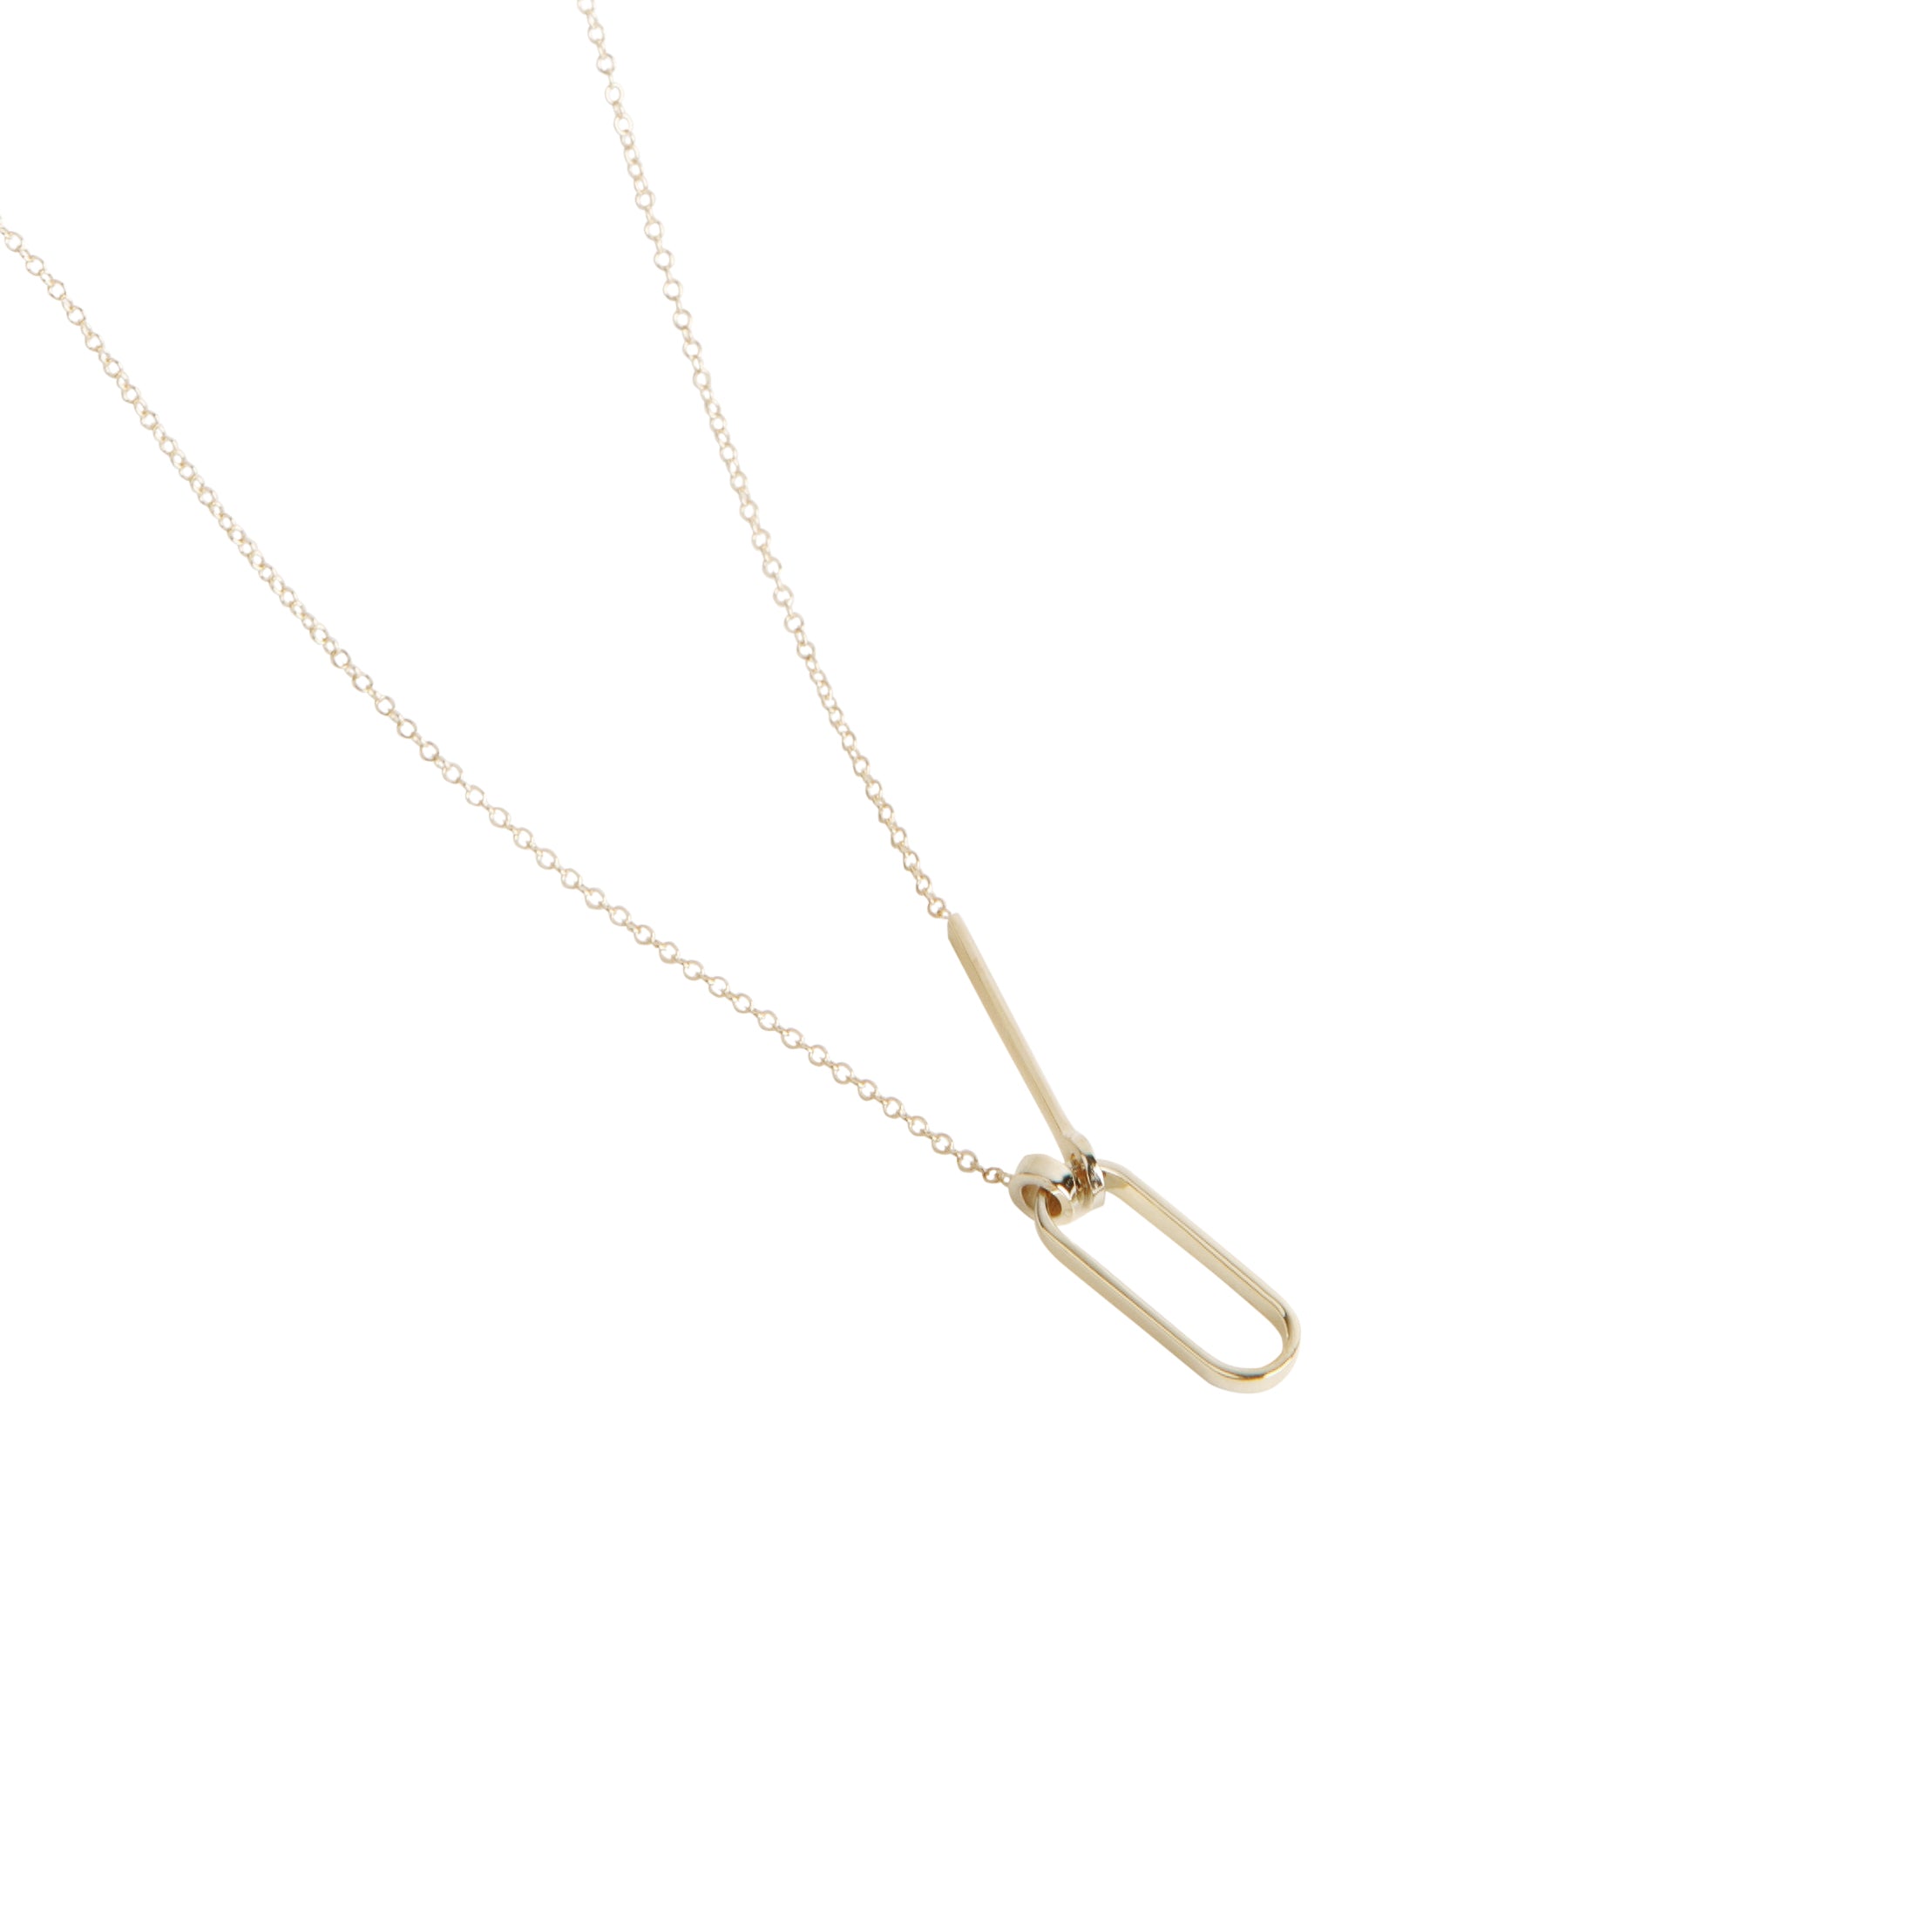 Visi Cool Necklace in 14k Gold By SHW Fine Jewelry New York City